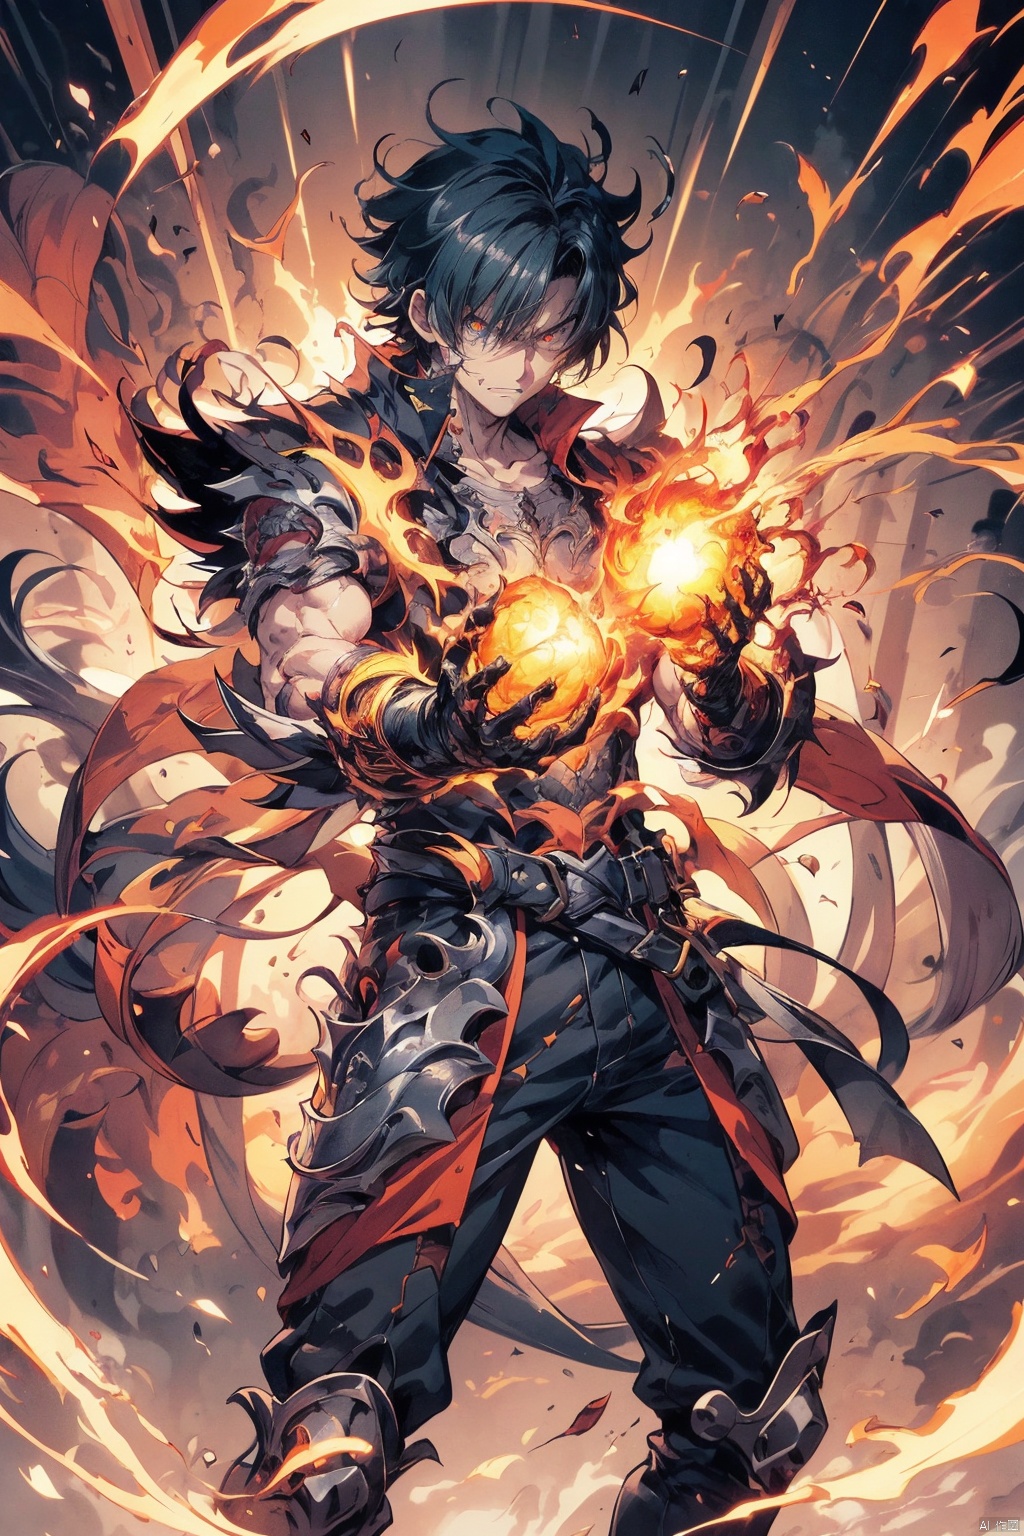 
a close up of a person holding a fire ball in their hand, an anime drawing by Yang J, pixiv contest winner, shin hanga, an epic anime of a energy man, fire!! full body, badass anime 8 k, fire powers, fire behind him, 4 k manga wallpaper, anime epic artwork, human and dragon fusion, handsome guy in demon slayer art